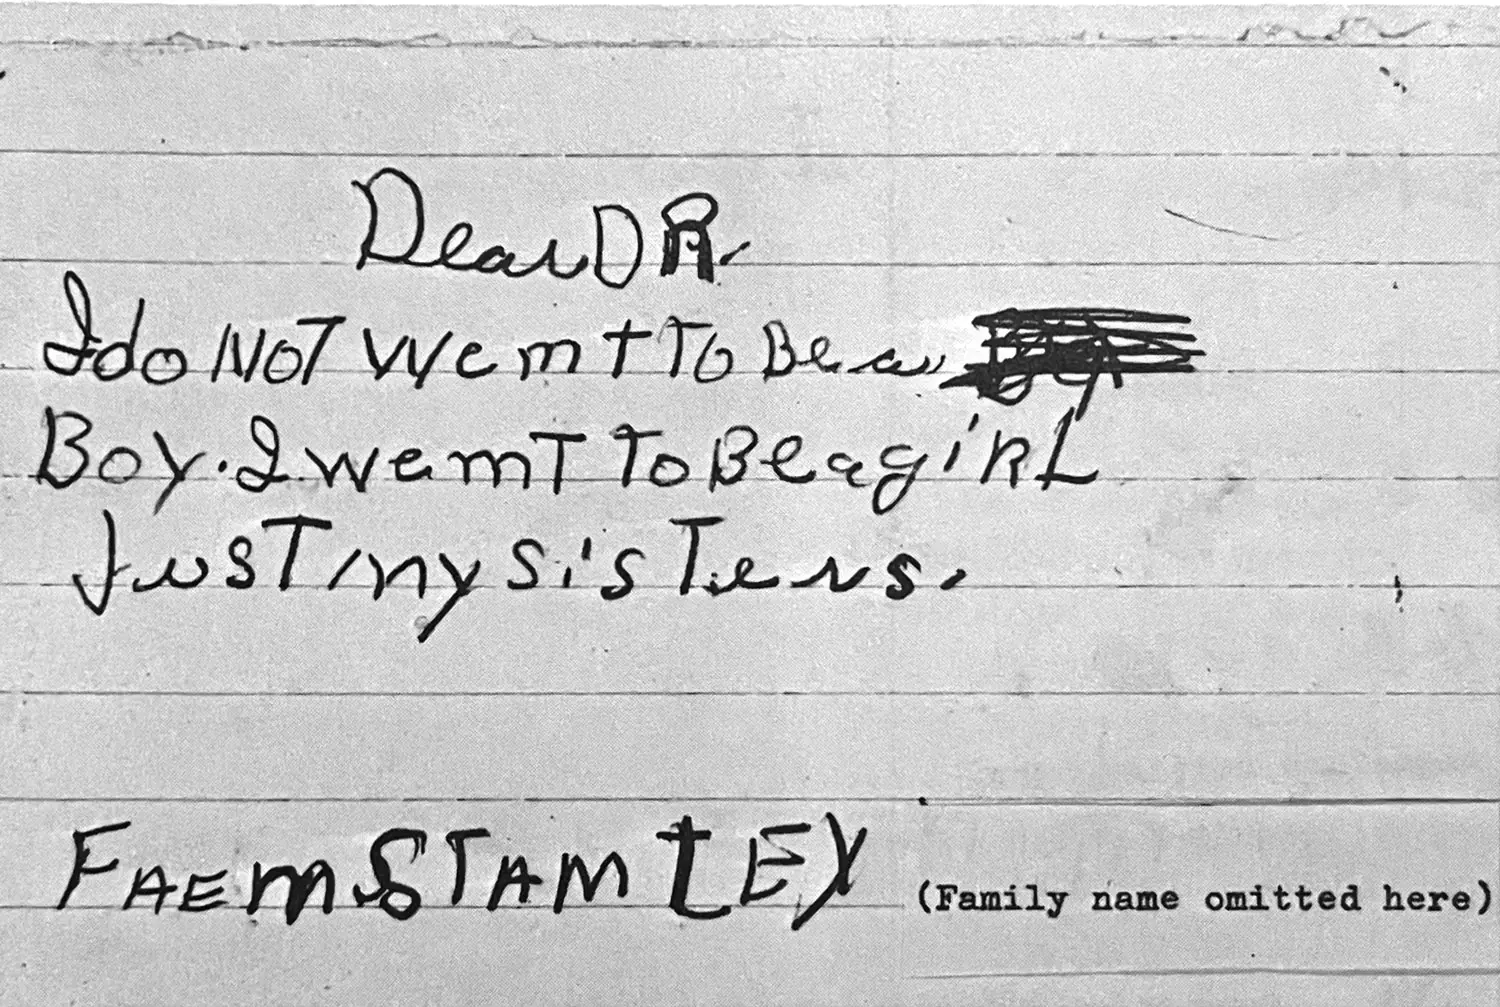 A scan of lined paper upon which is written, in a child’s handwriting: “Dear Dr. I do not want to be a boy. I want to be a girl. Just my sisters. From Stanley.”
